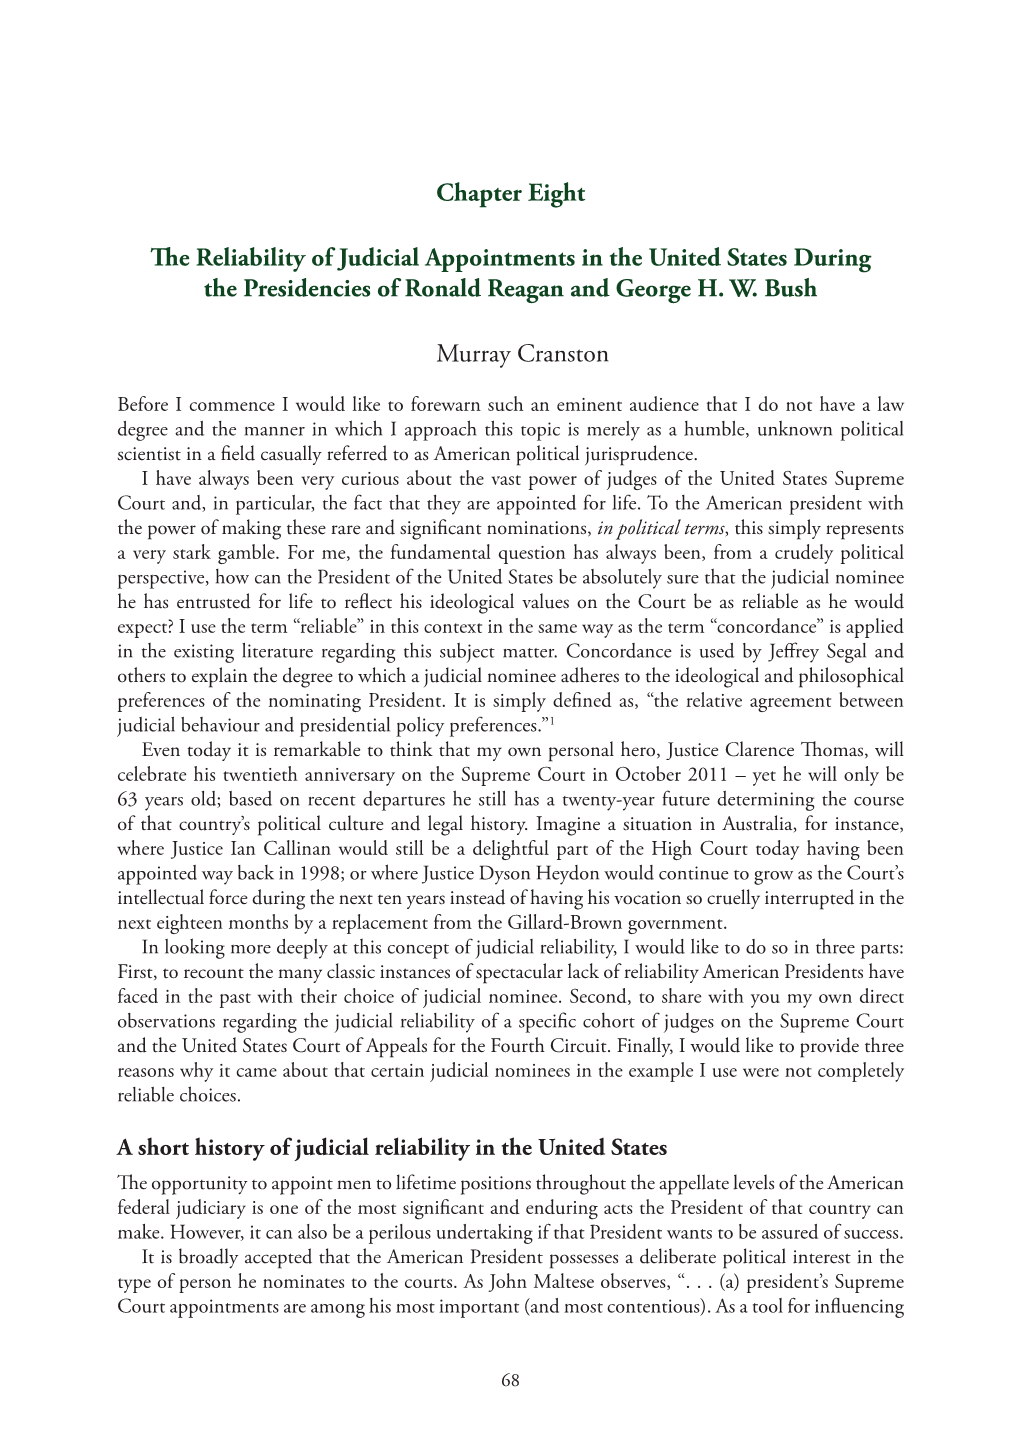 The Reliability of Judicial Appointments in the United States During the Presidencies of Ronald Reagan and George H